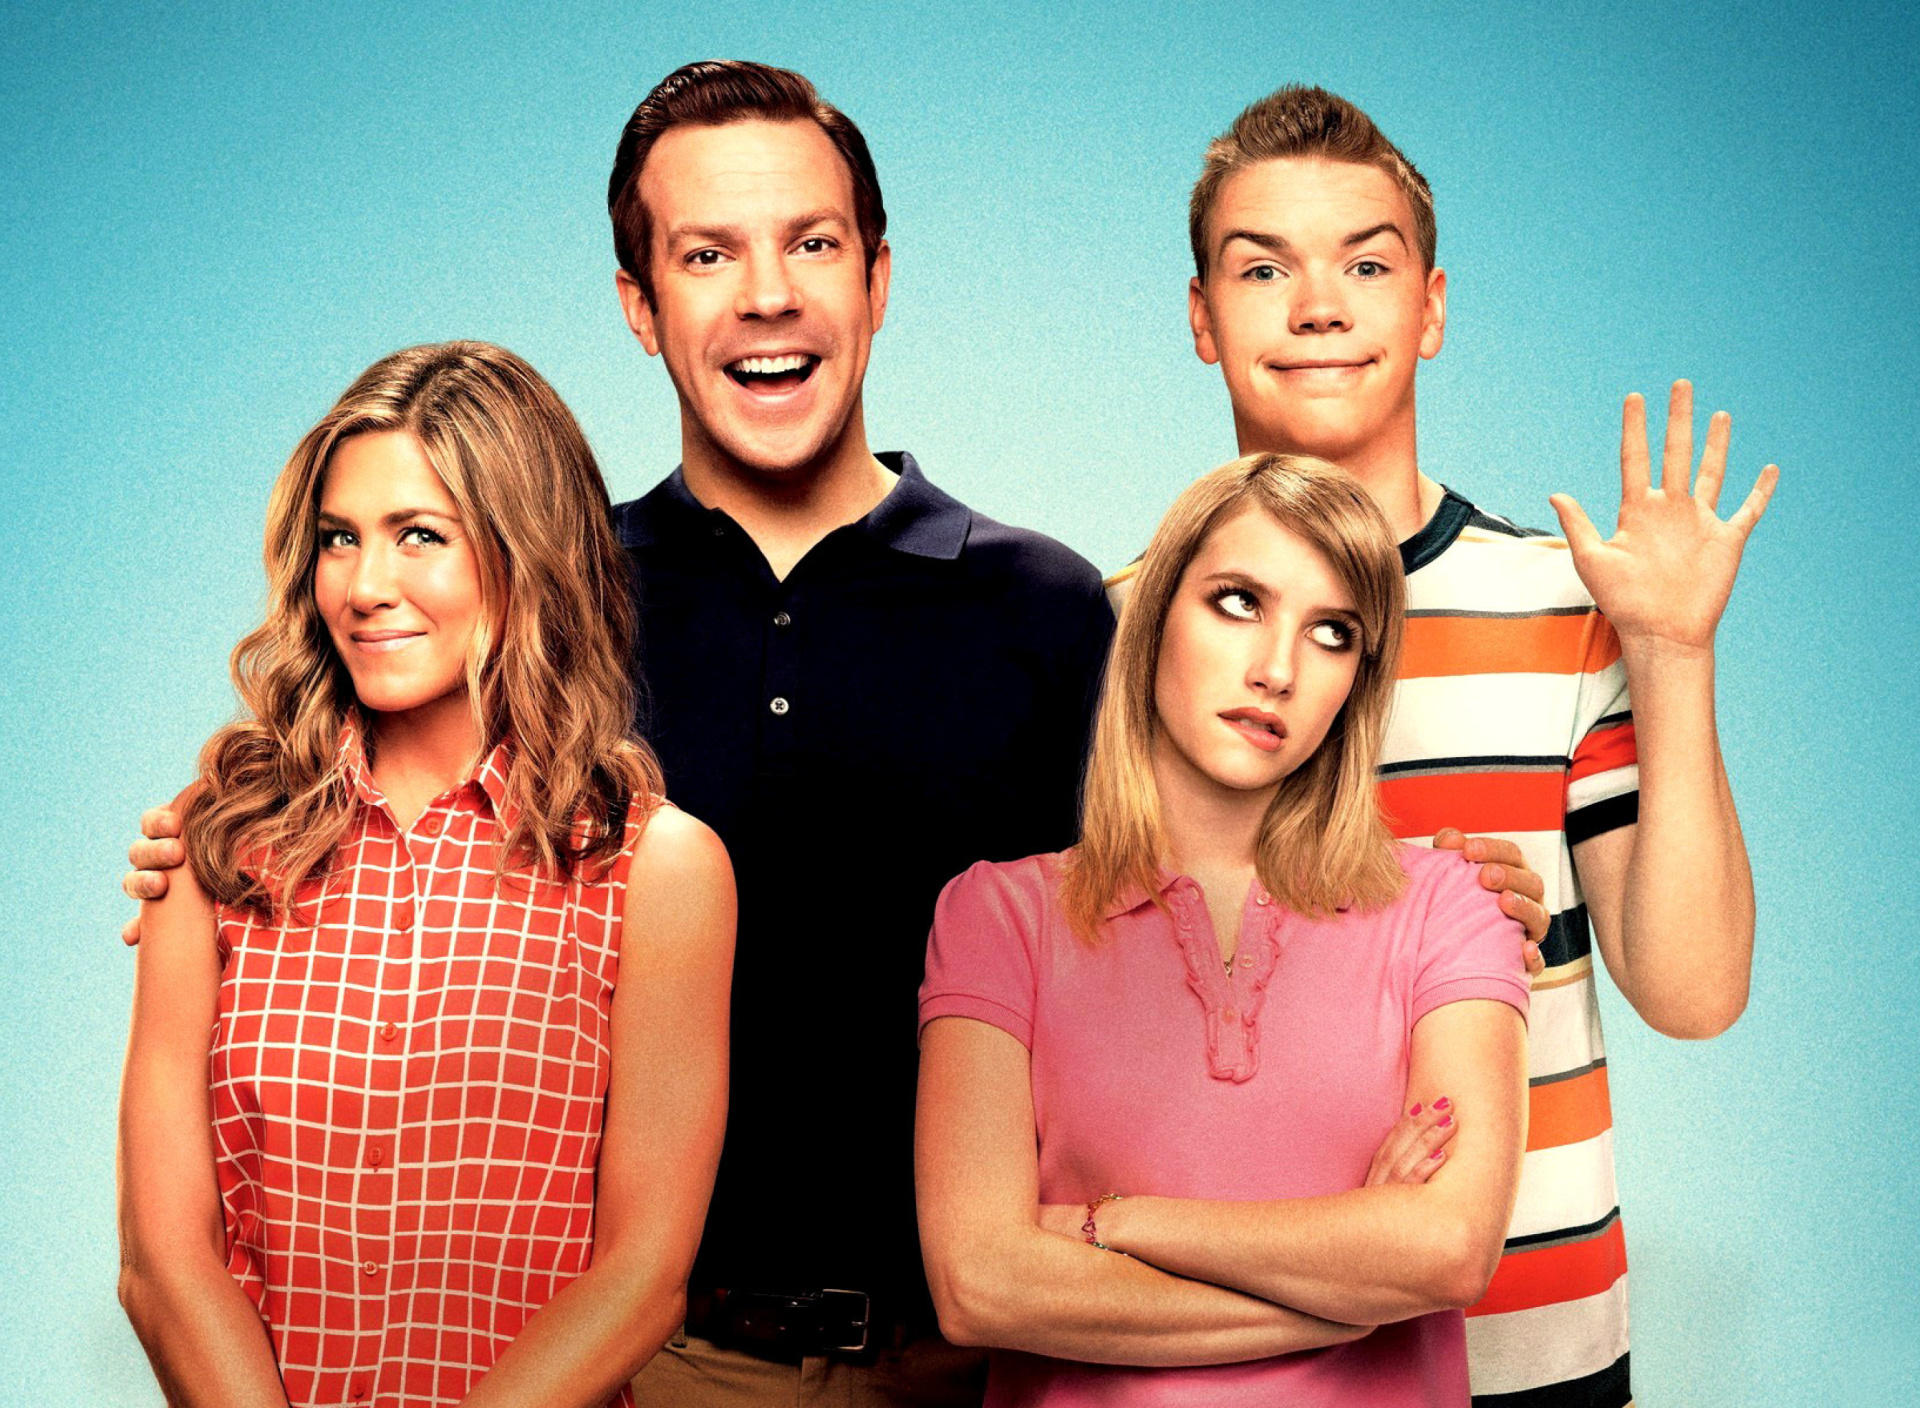 We are the Millers screenshot #1 1920x1408